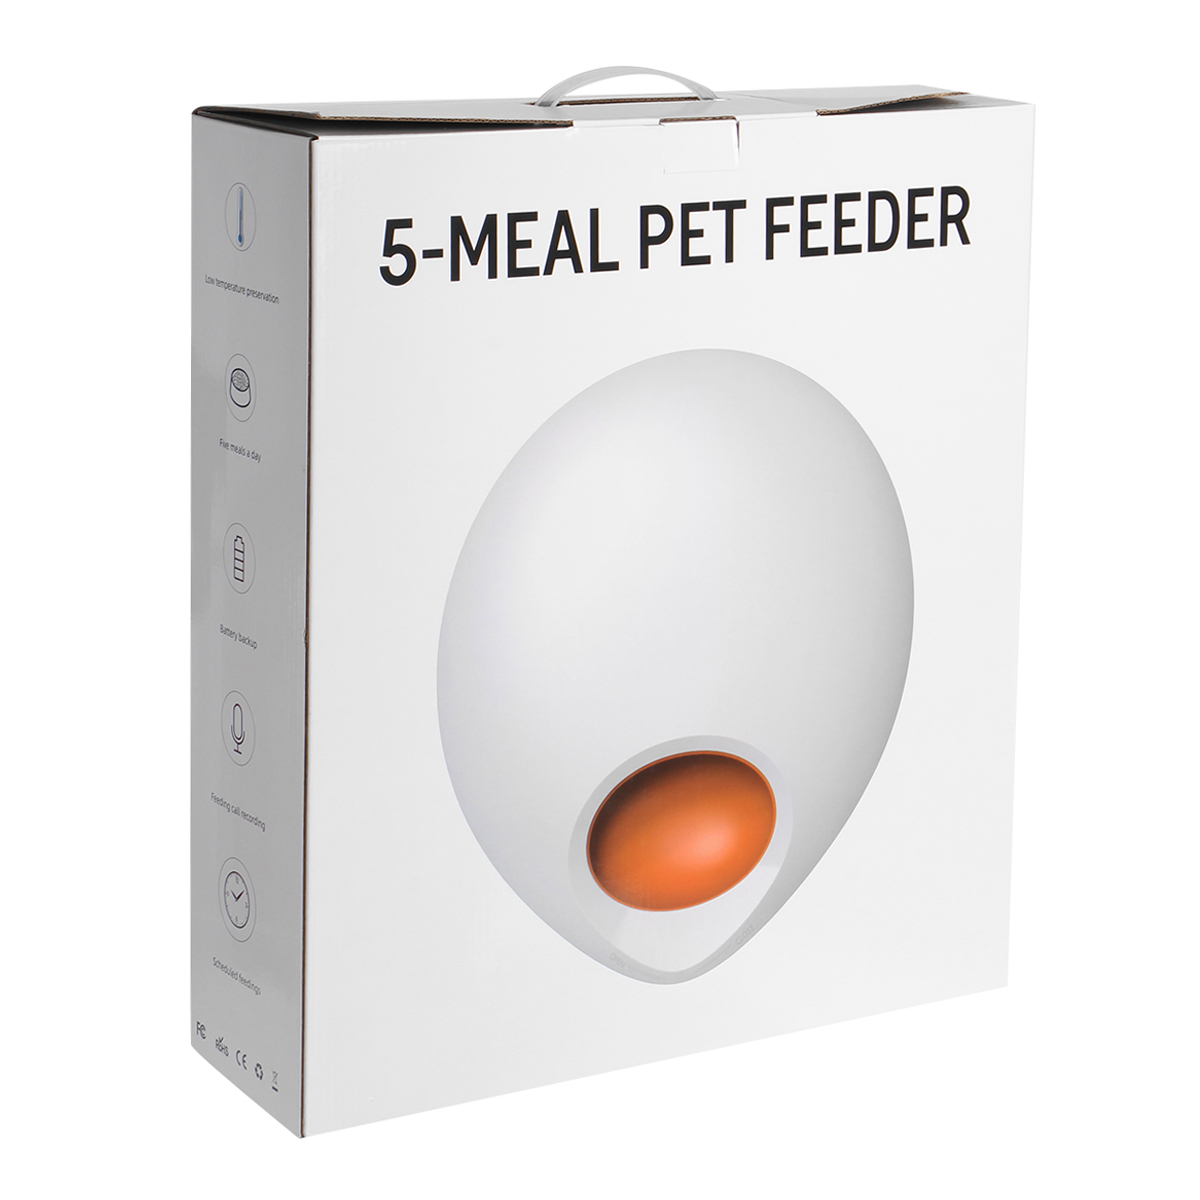 DUDUPET-Automatic-Pet-Feeder-For-CatDog-WiFi-Smart-Rotatable-Dogs-Food-Dispenser-Control-APP-Timed-R-1927451-11